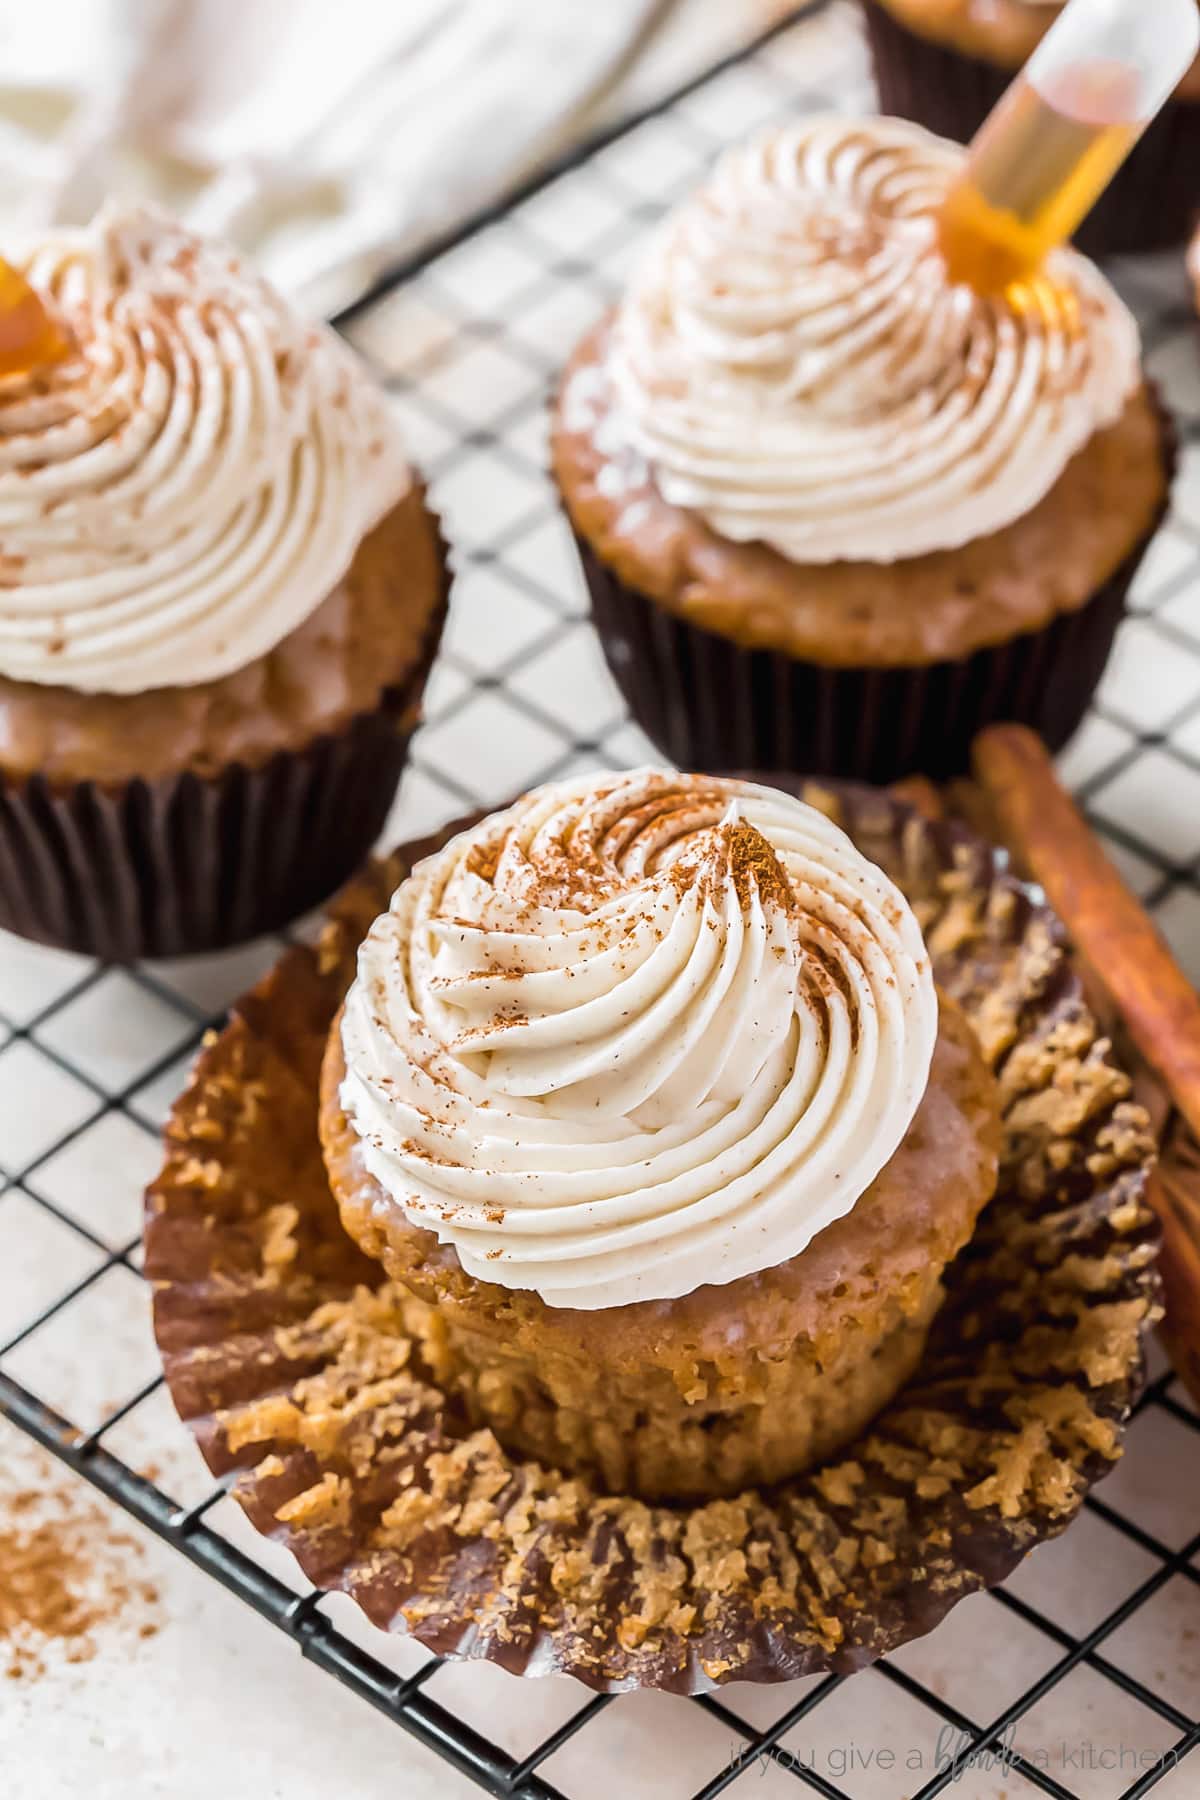 buttered rum cupcakes topped with rum frosting and cinnamon on unwrapped paper cupcake liner